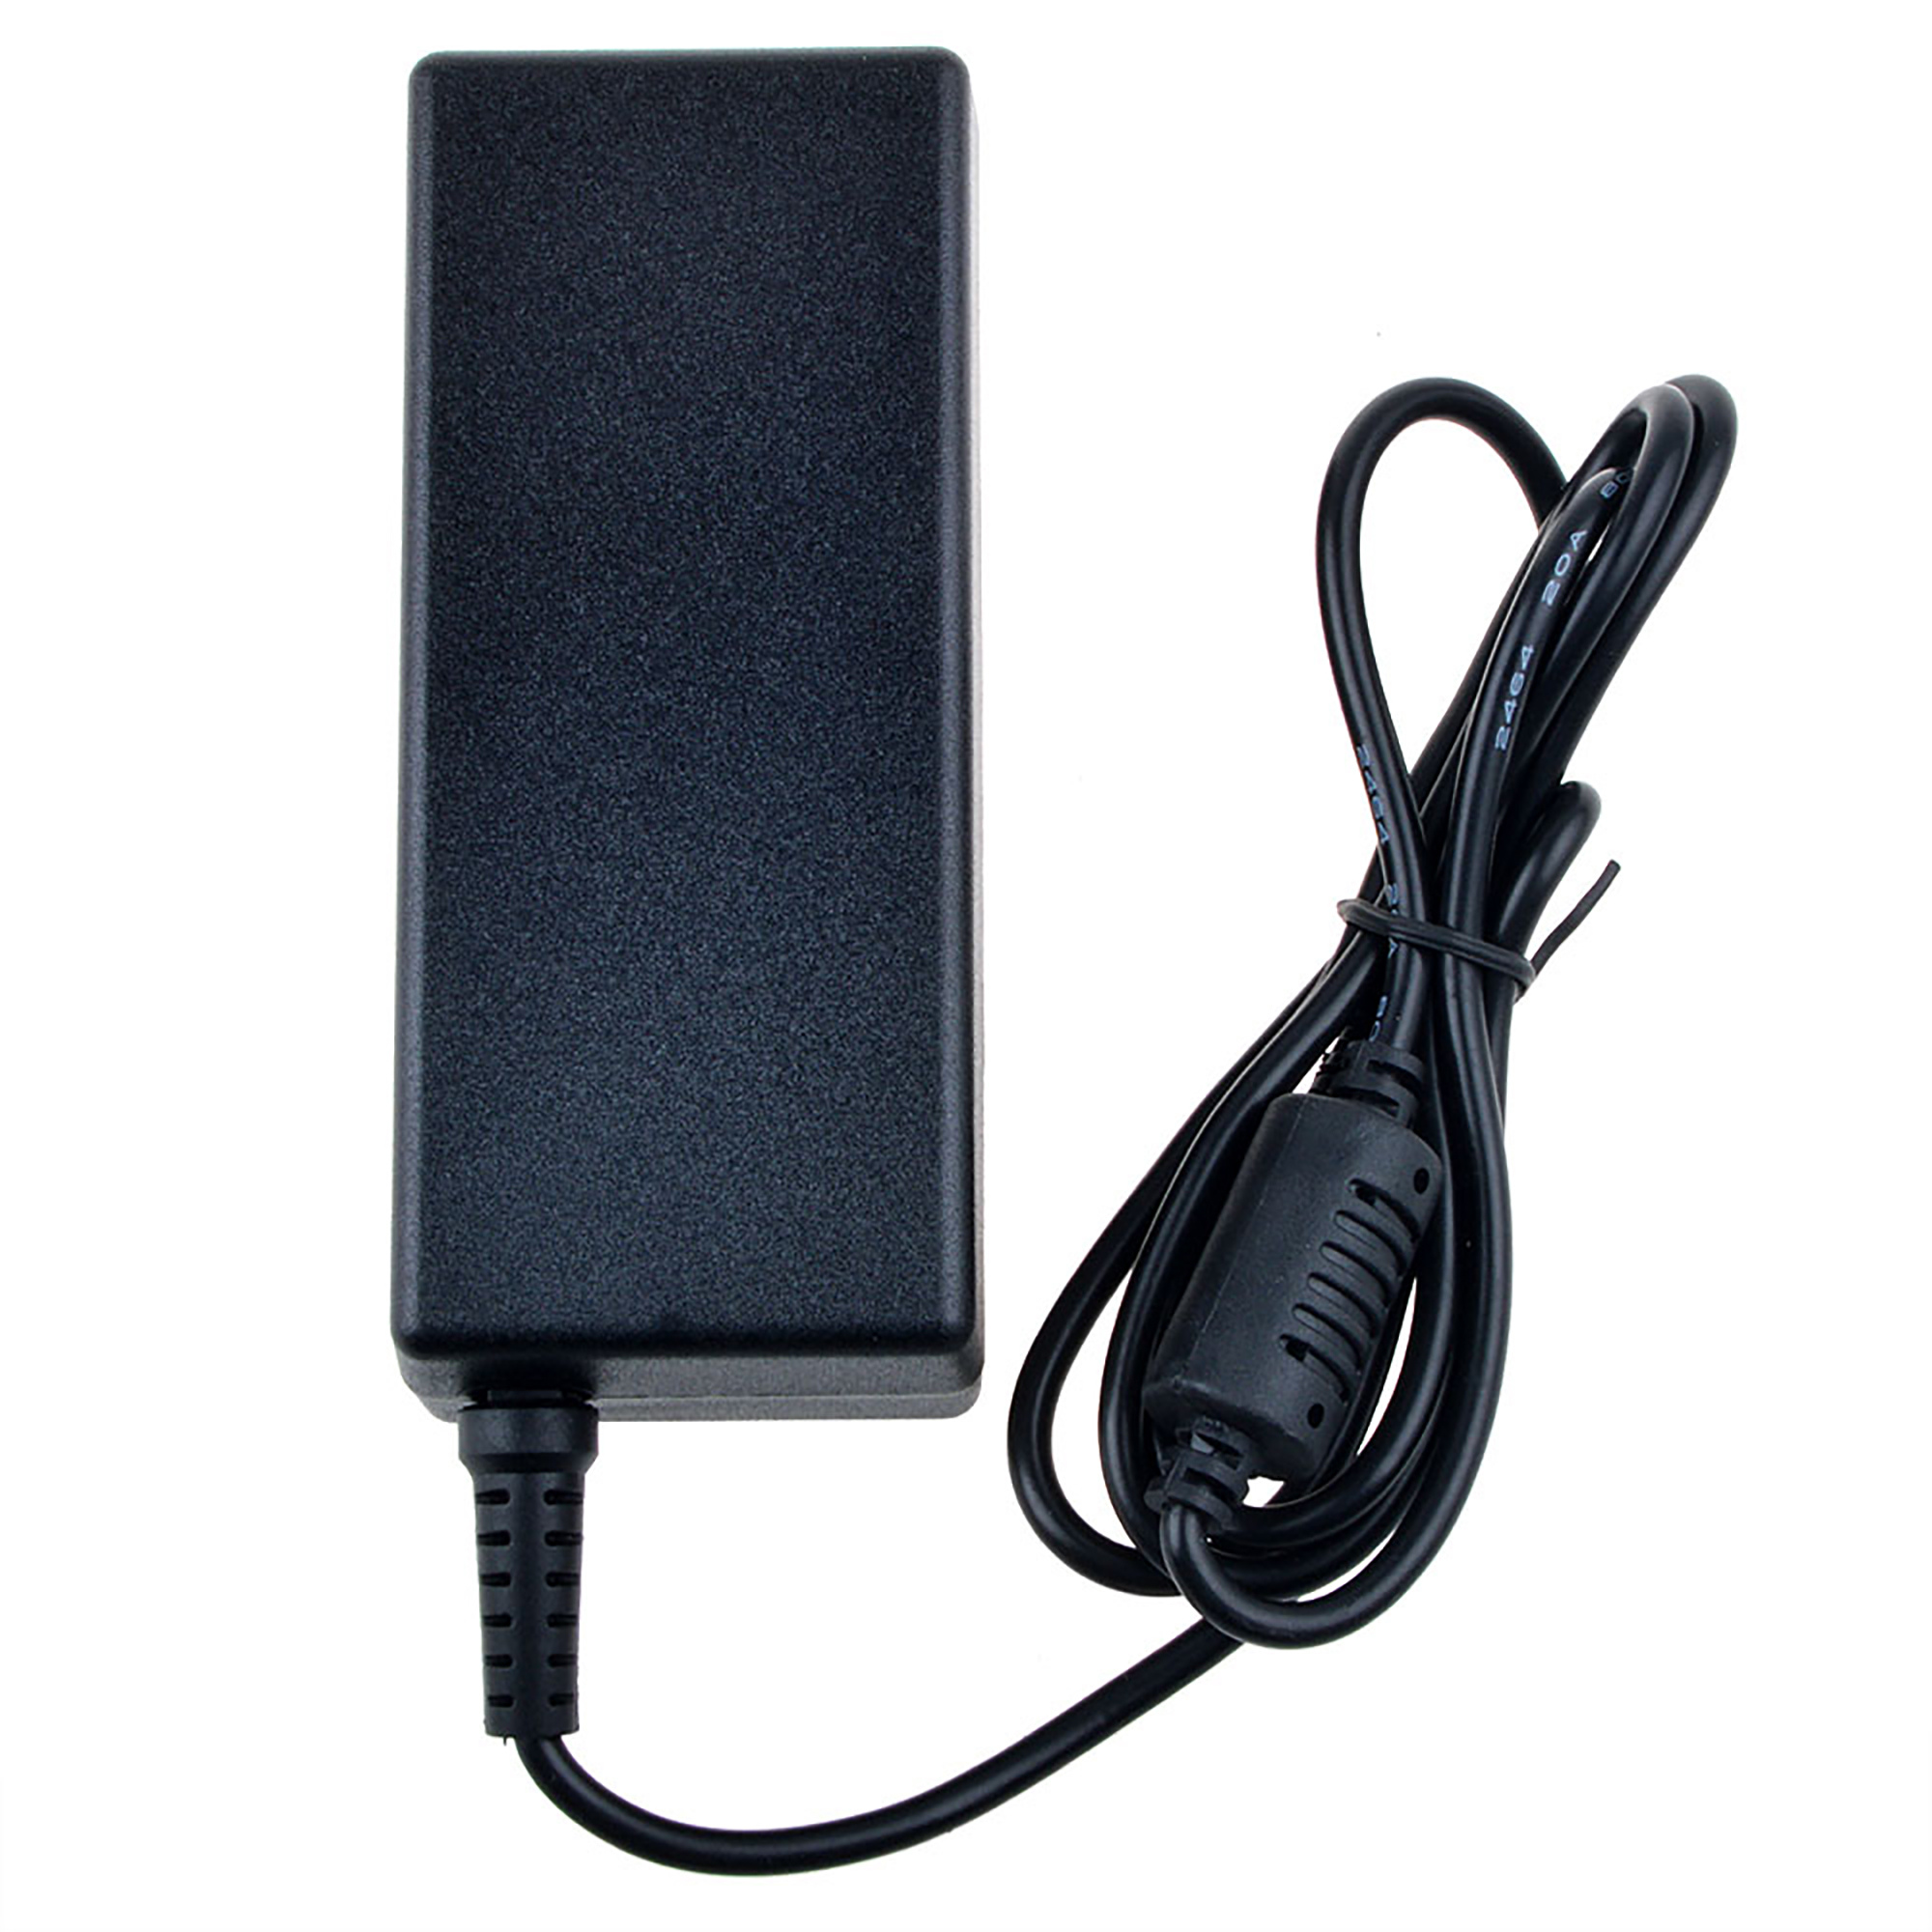 PKPOWER 65W DC Adapter Charger Replacement for Intel NUC NUC7I7BNH BOXNUC7I7BNH NUC7i5BNH PSU - image 2 of 5